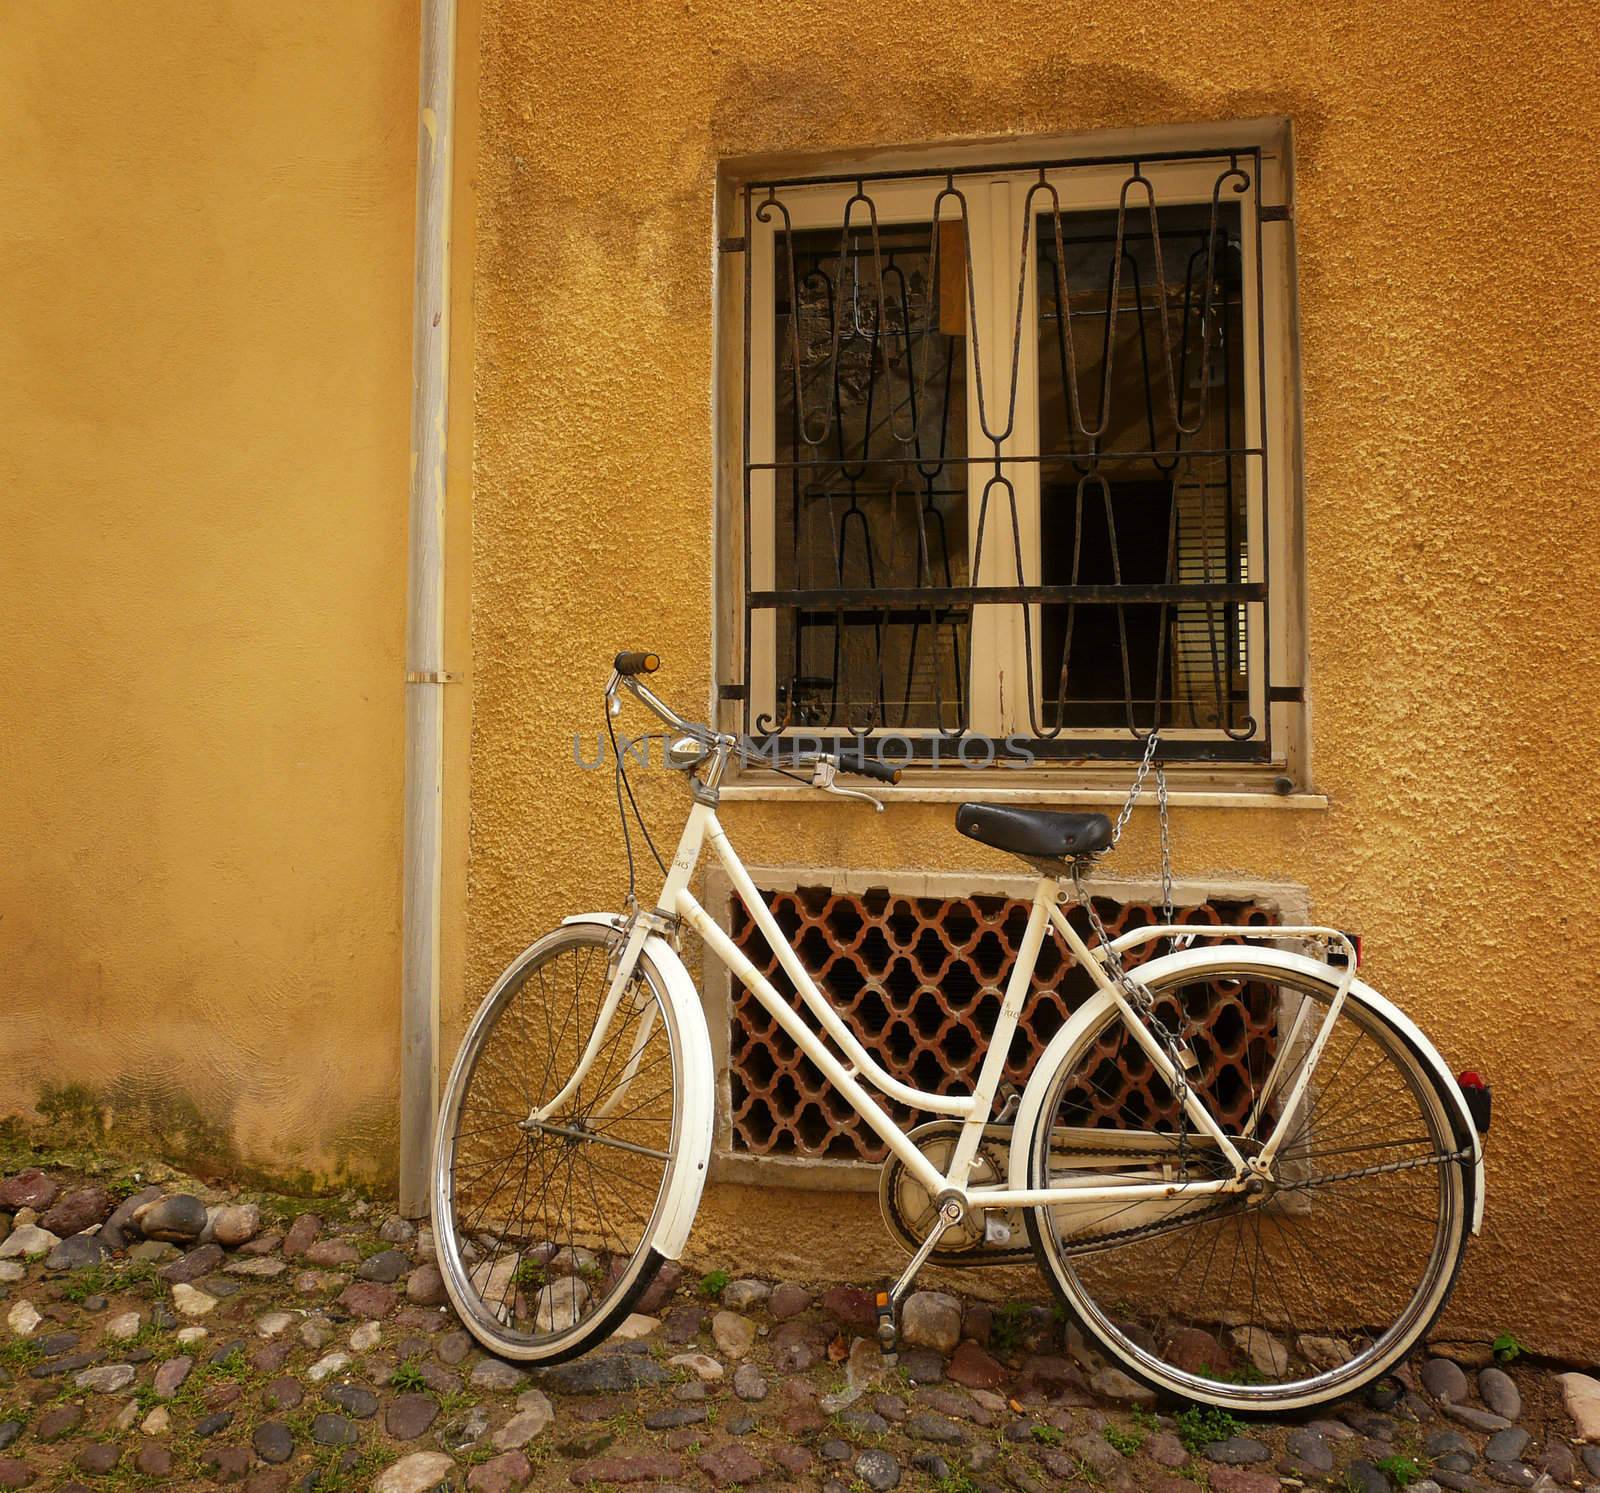 Old bicycle standing against a wall under a window.